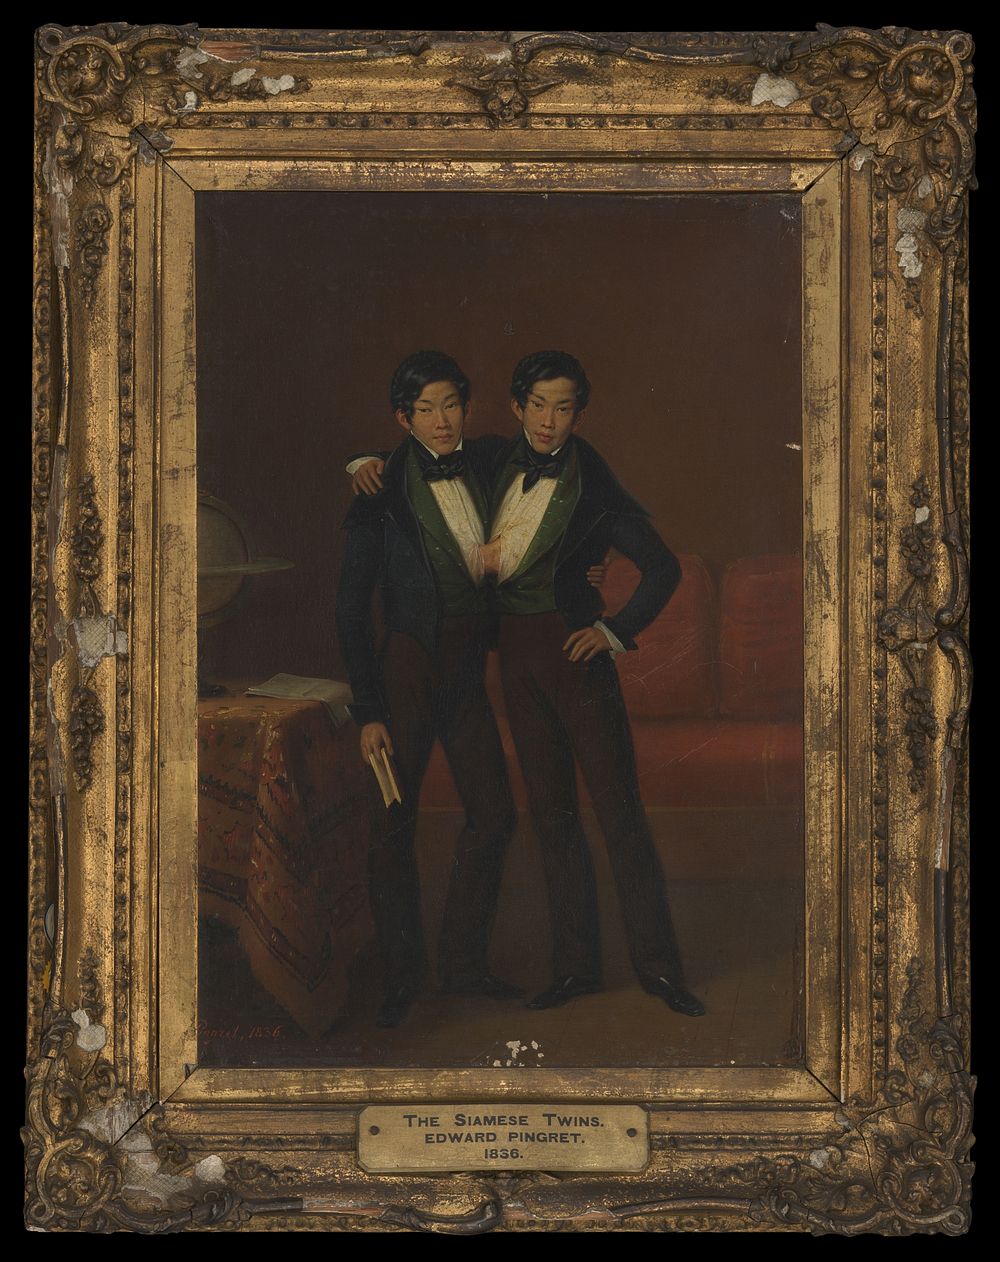 Chang and Eng Bunker. Oil painting by Edouard-Henri-Théophile Pingret, 1836.